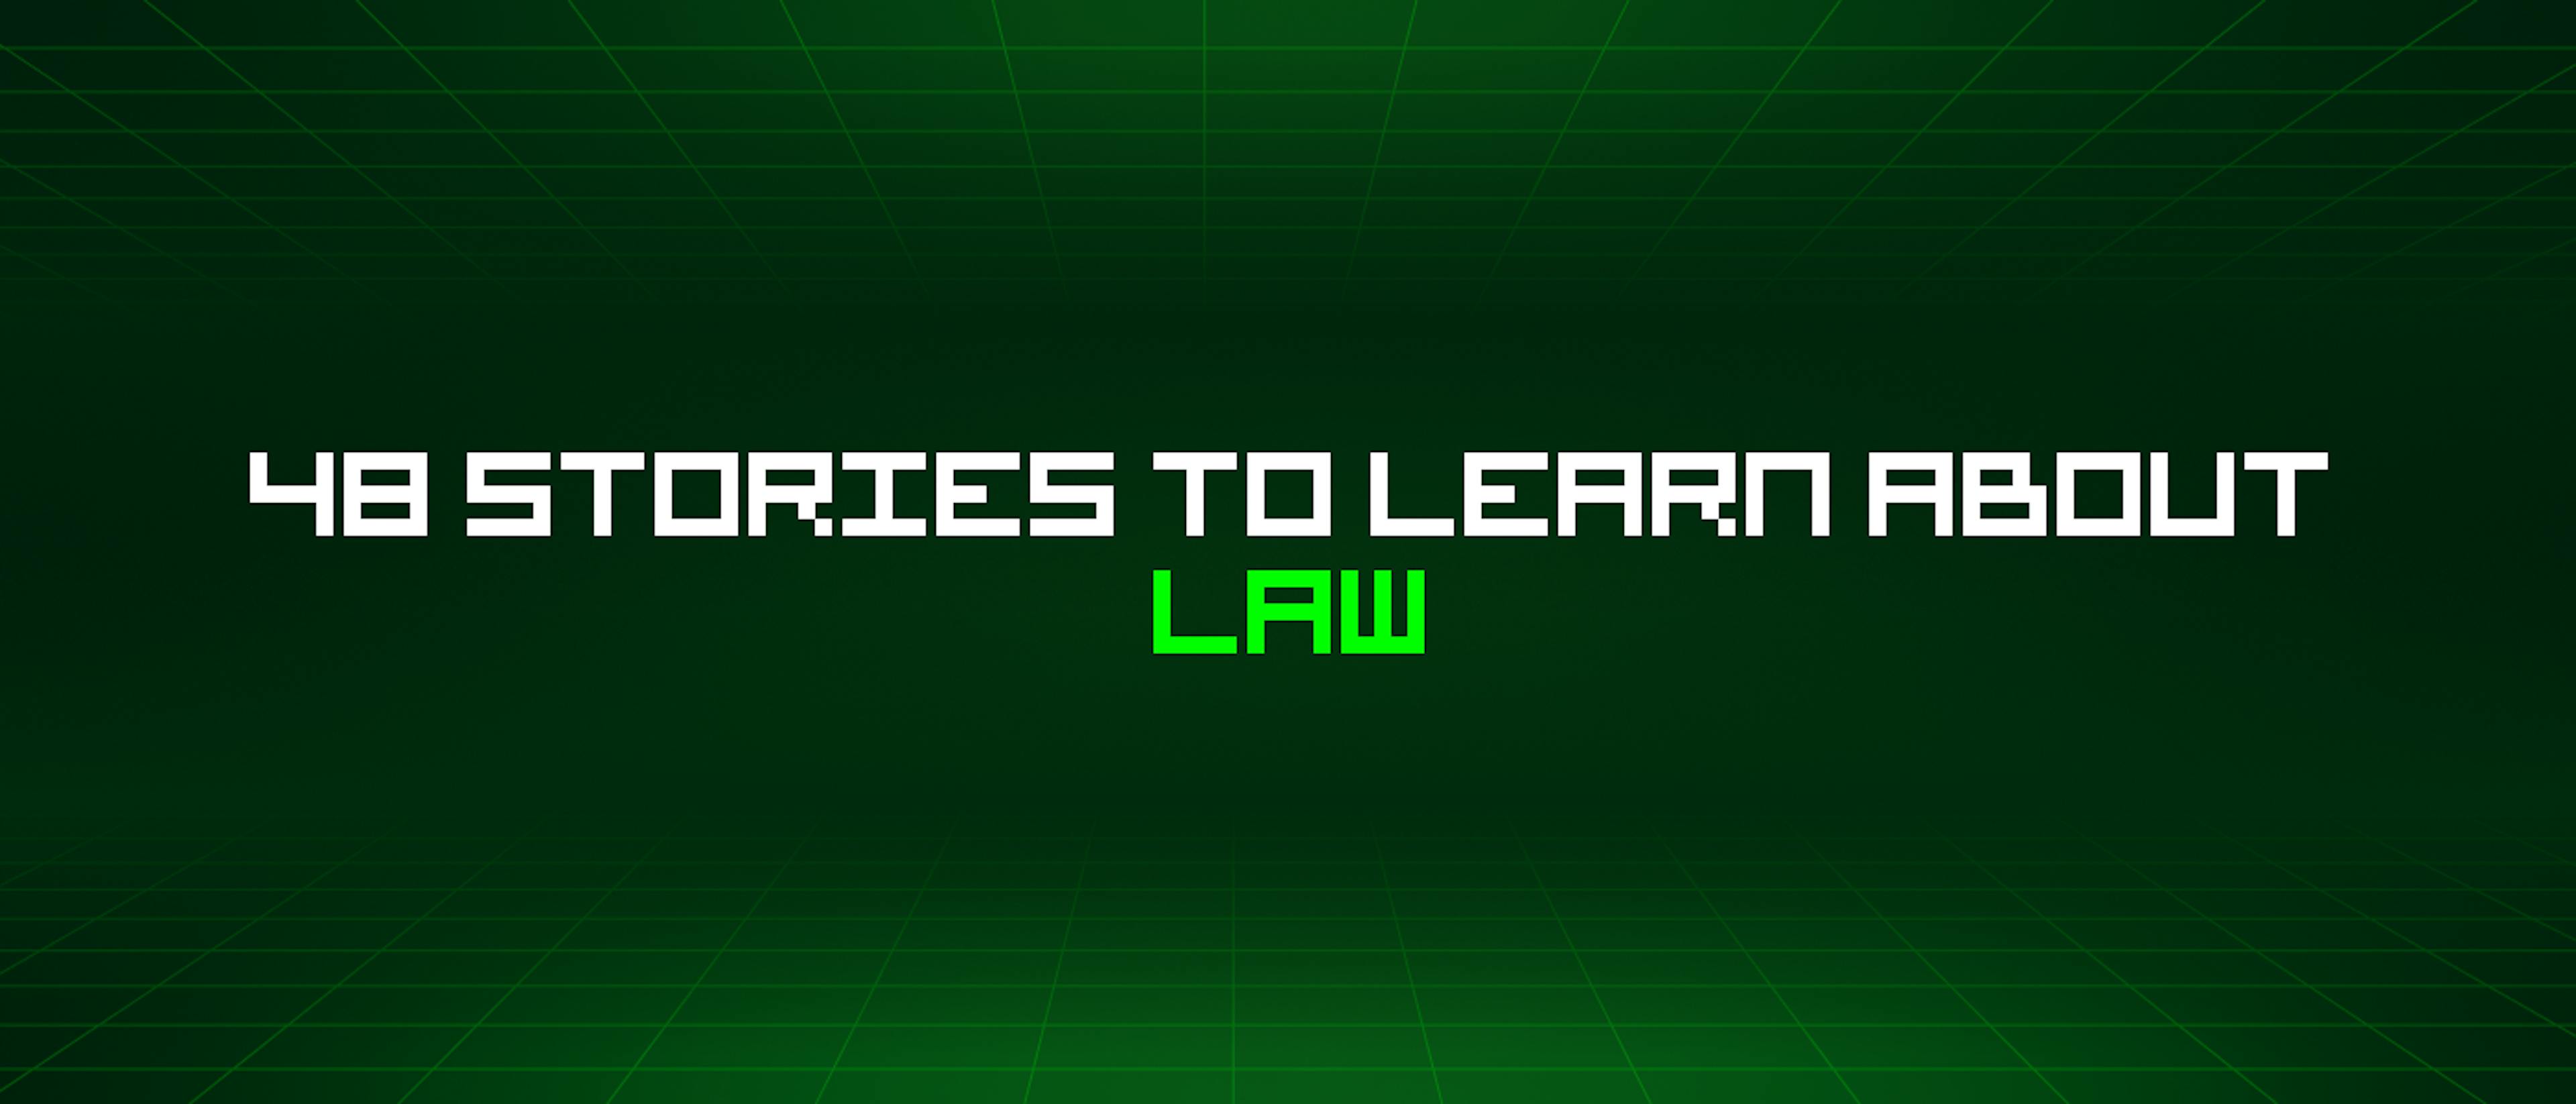 featured image - 48 Stories To Learn About Law